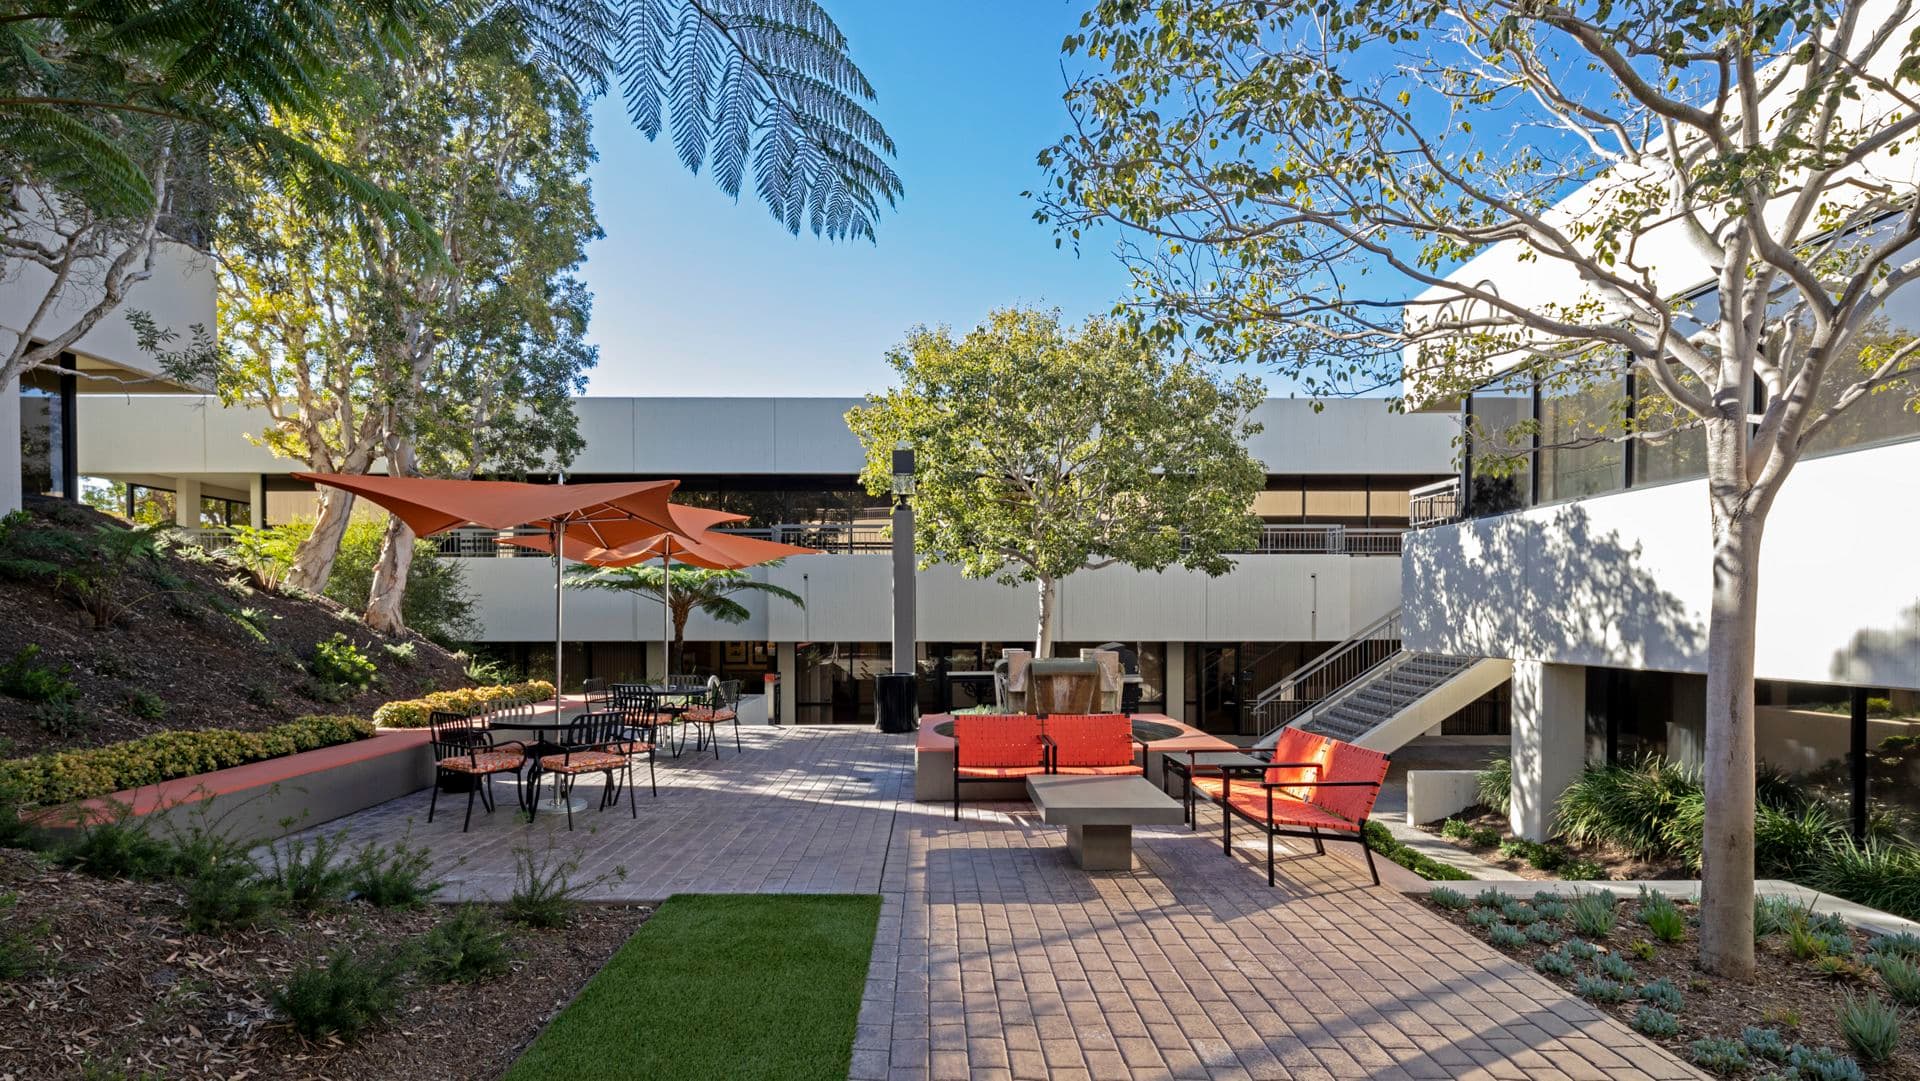 After photography of the outdoor workspace reinvestment at Gateway Plaza in Newport Beach, CA